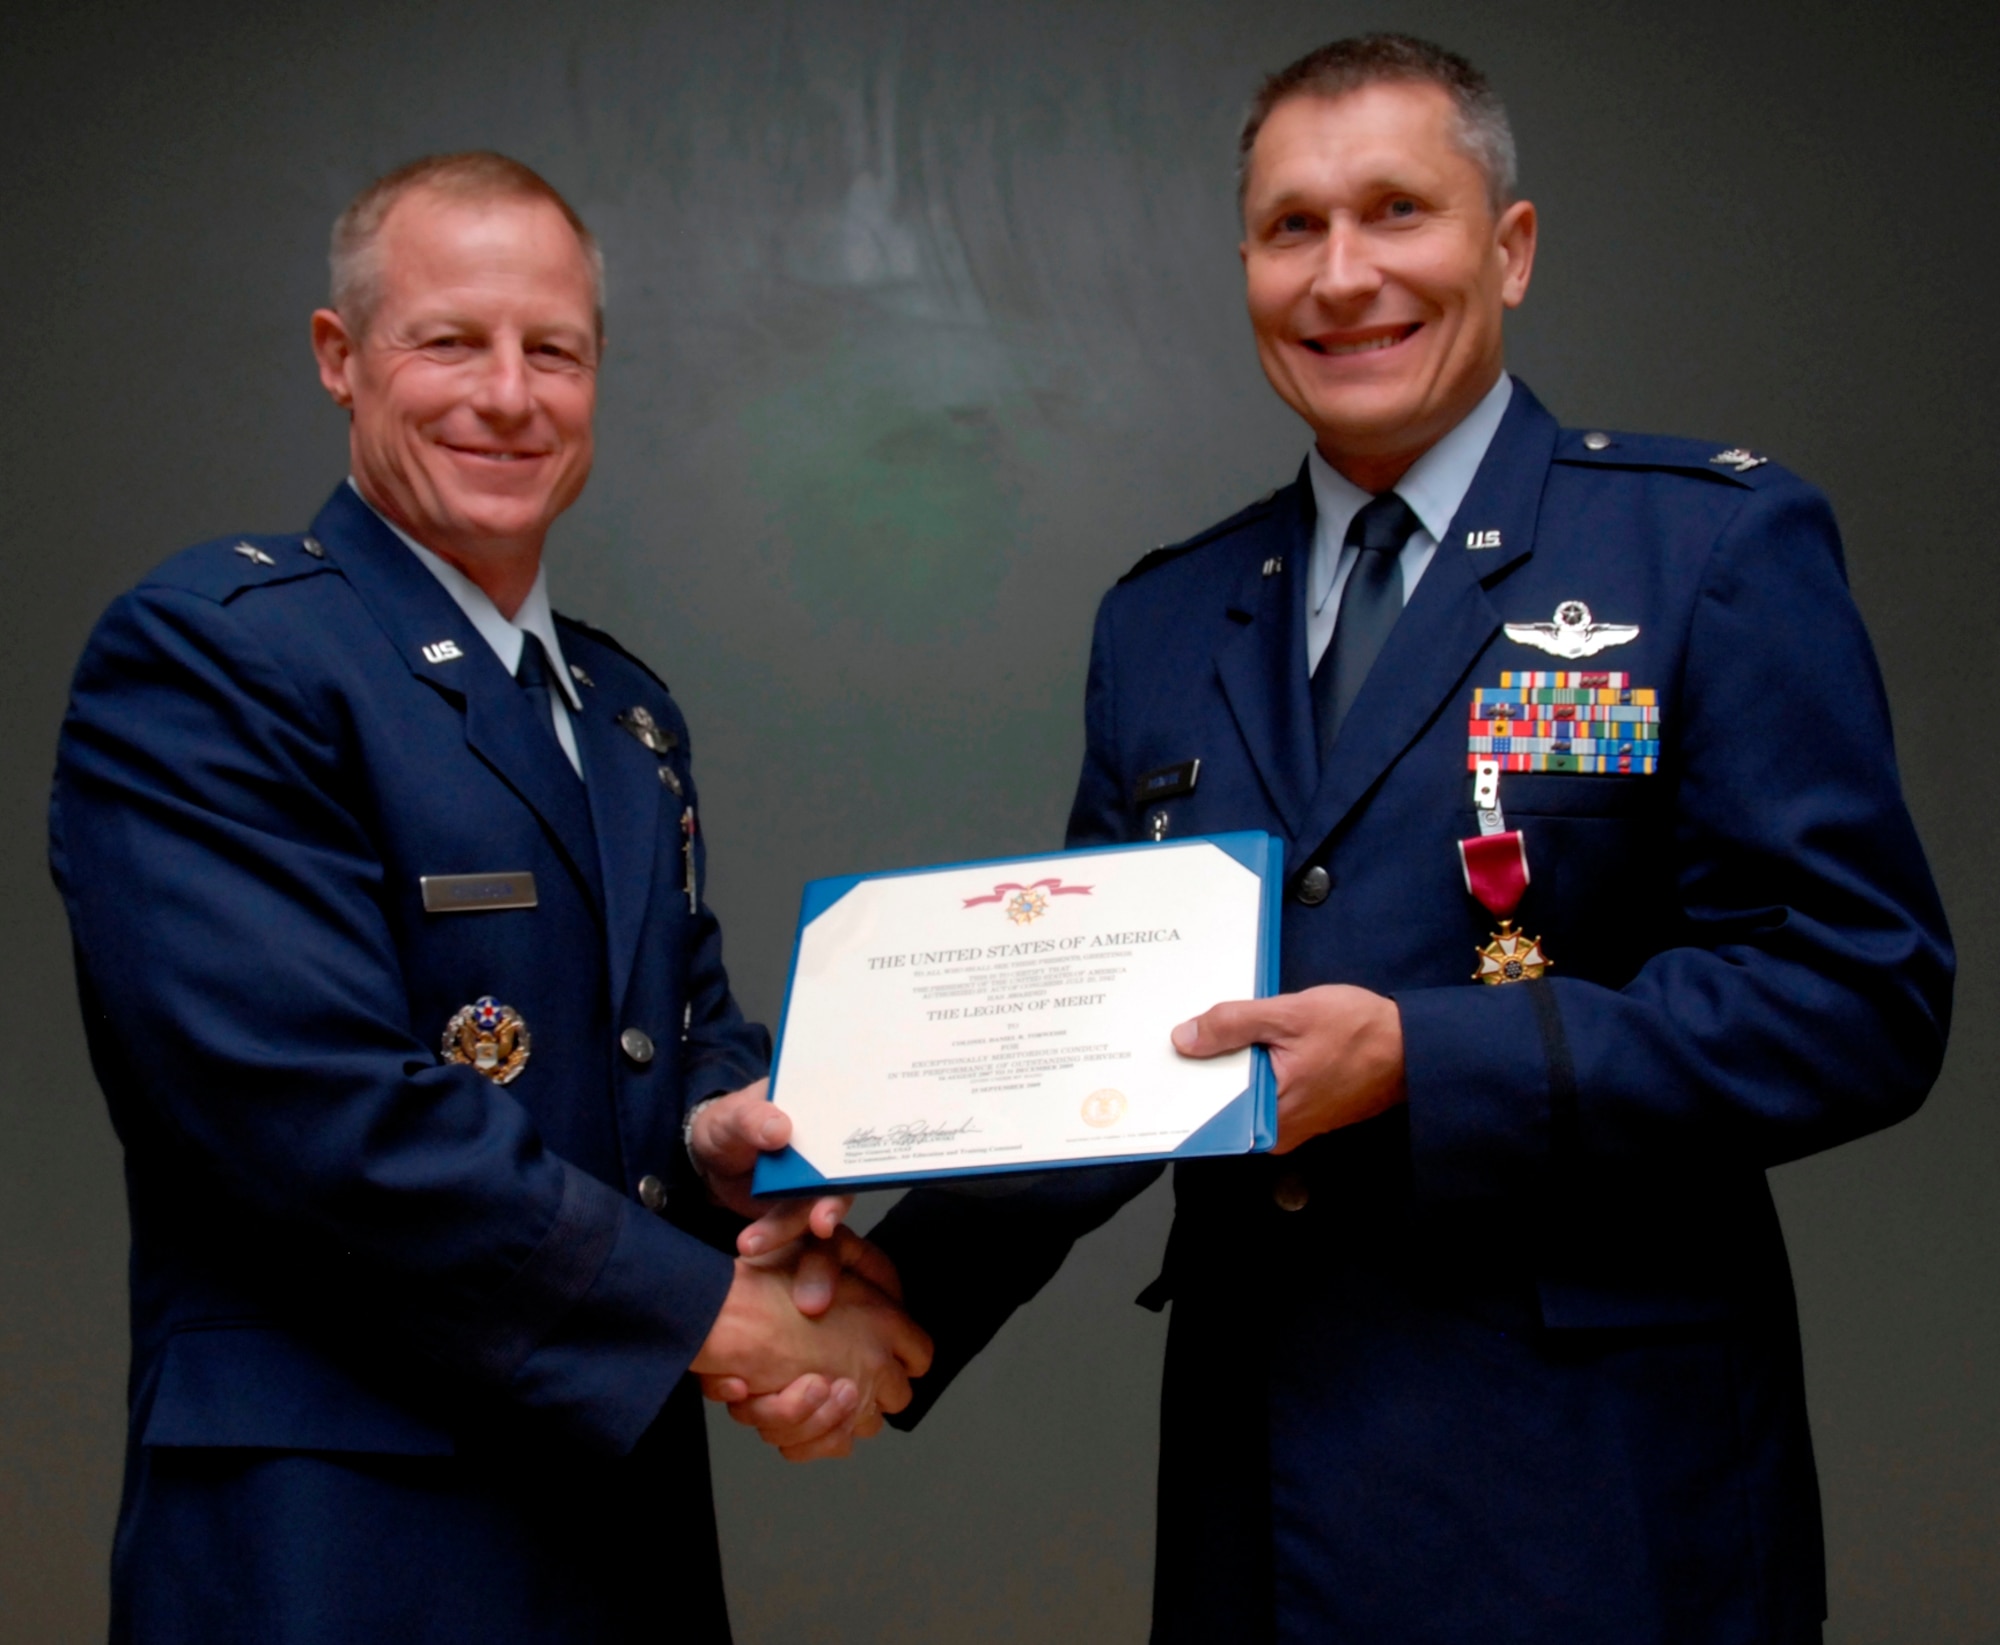 Col. Daniel Torweihe (right), former 80th Flying Training Wing vice commander, accepts the Legion of Merit from Brig. Gen. David Petersen, former commander of the 80th FTW, at the colonel’s retirement ceremony Oct. 2 at the large auditorium in Bldg. 1900. (U.S. Air Force photo/Mike Litteken)